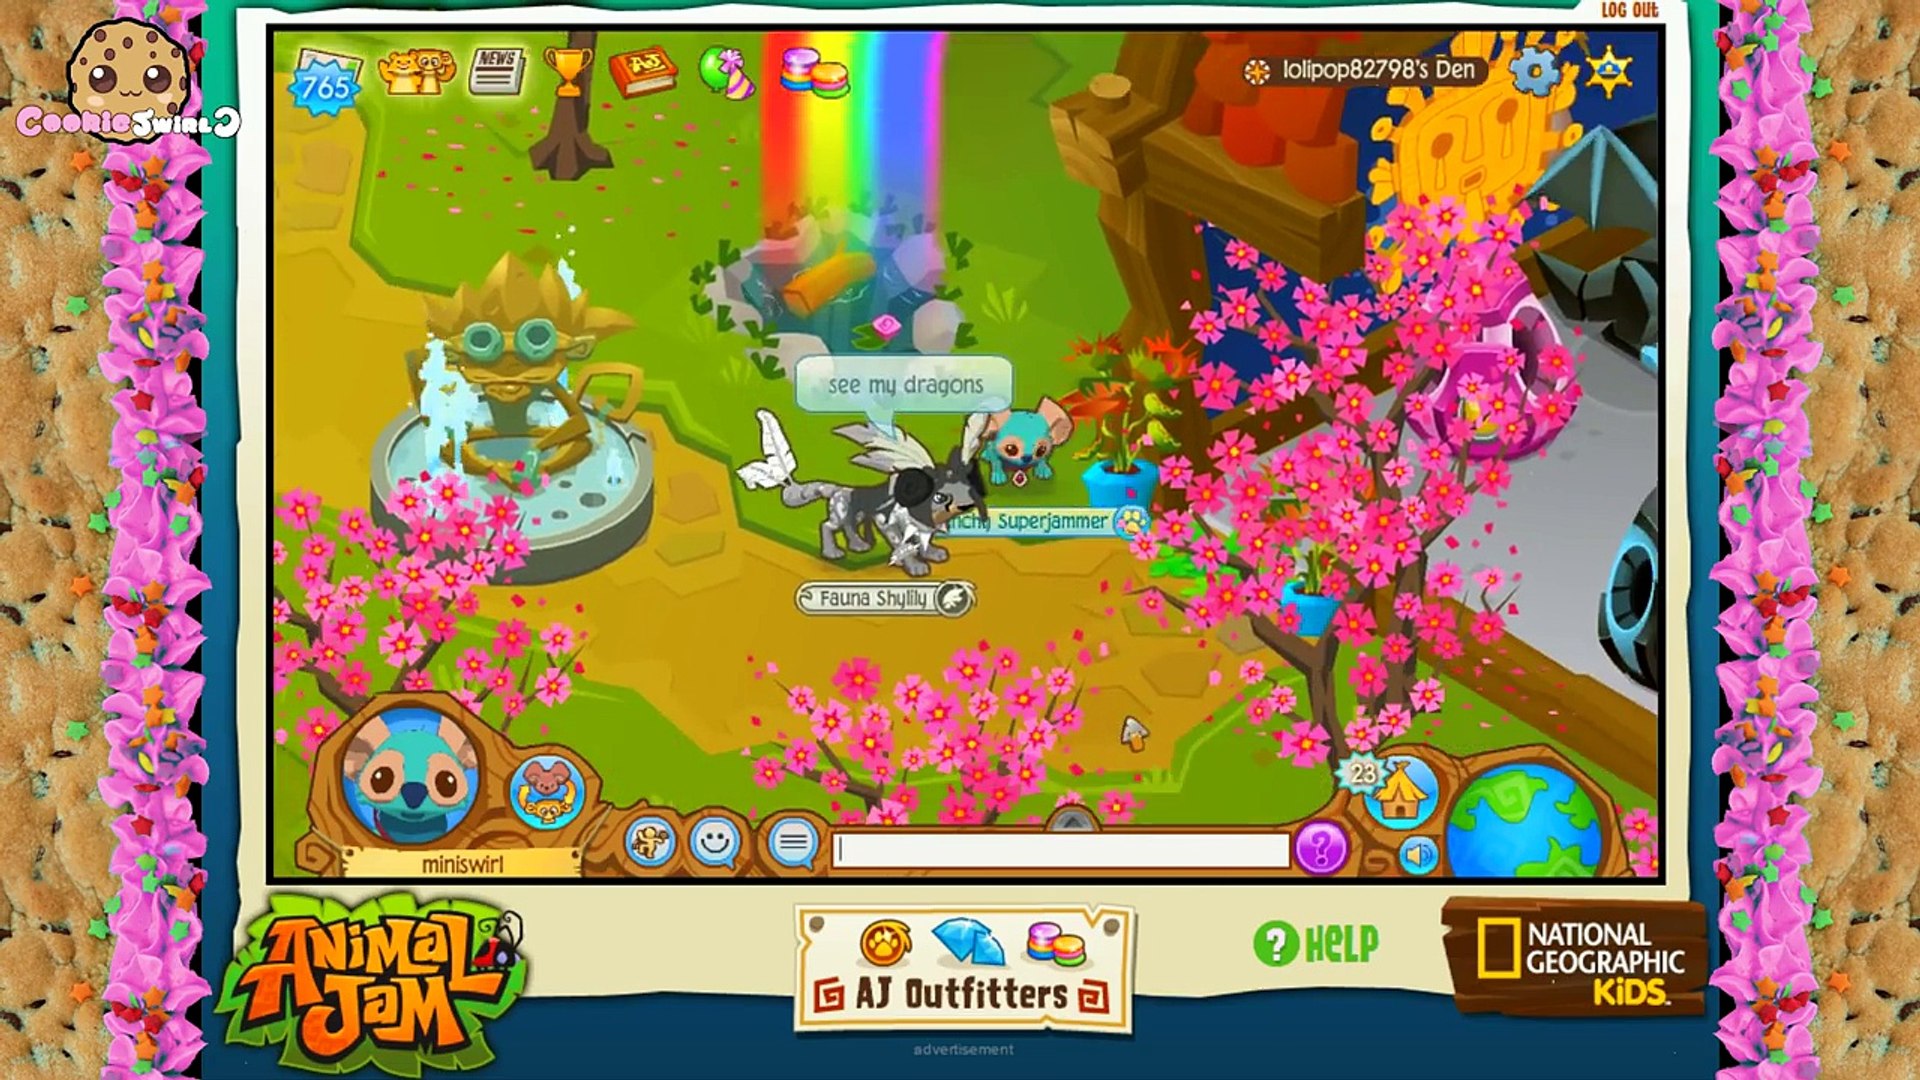 Cookieswirlc Animal Jam Online Game Play with Cookie Fans !!!! Random Fun  Party Video - video Dailymotion